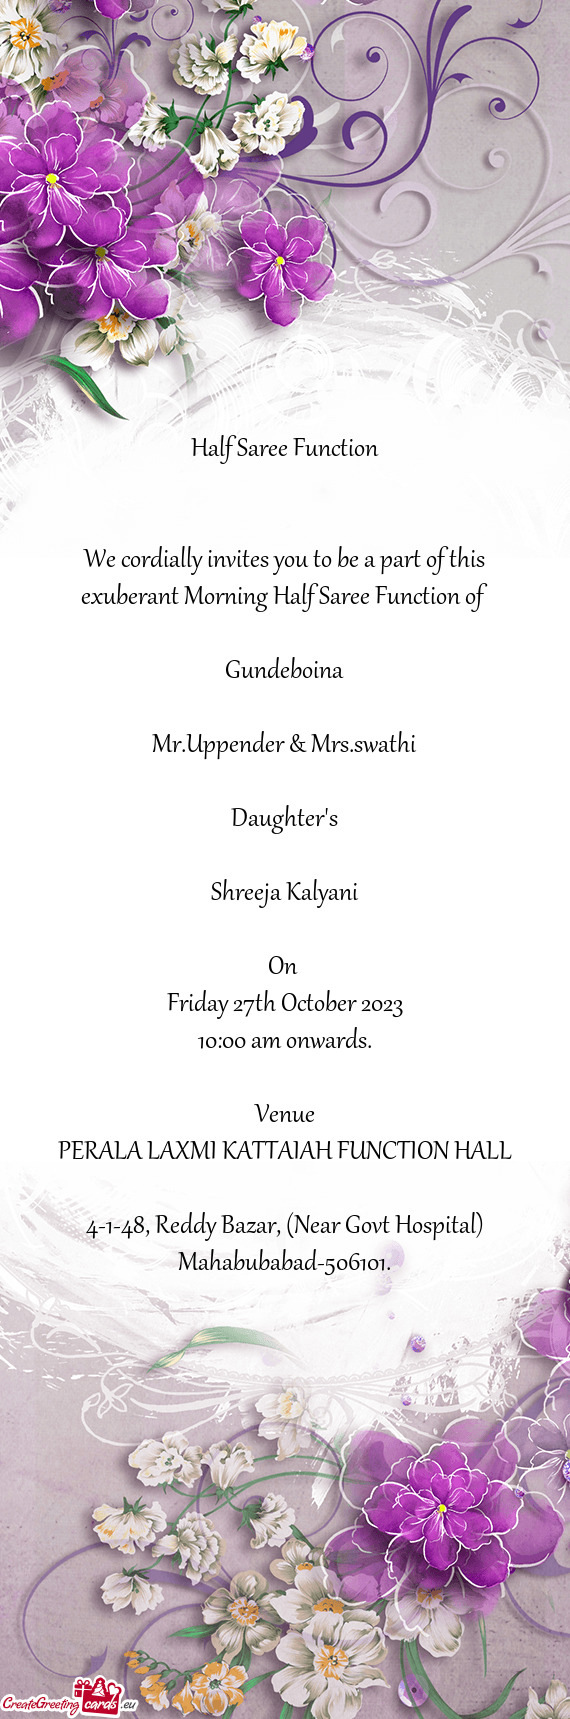 We cordially invites you to be a part of this exuberant Morning Half Saree Function of